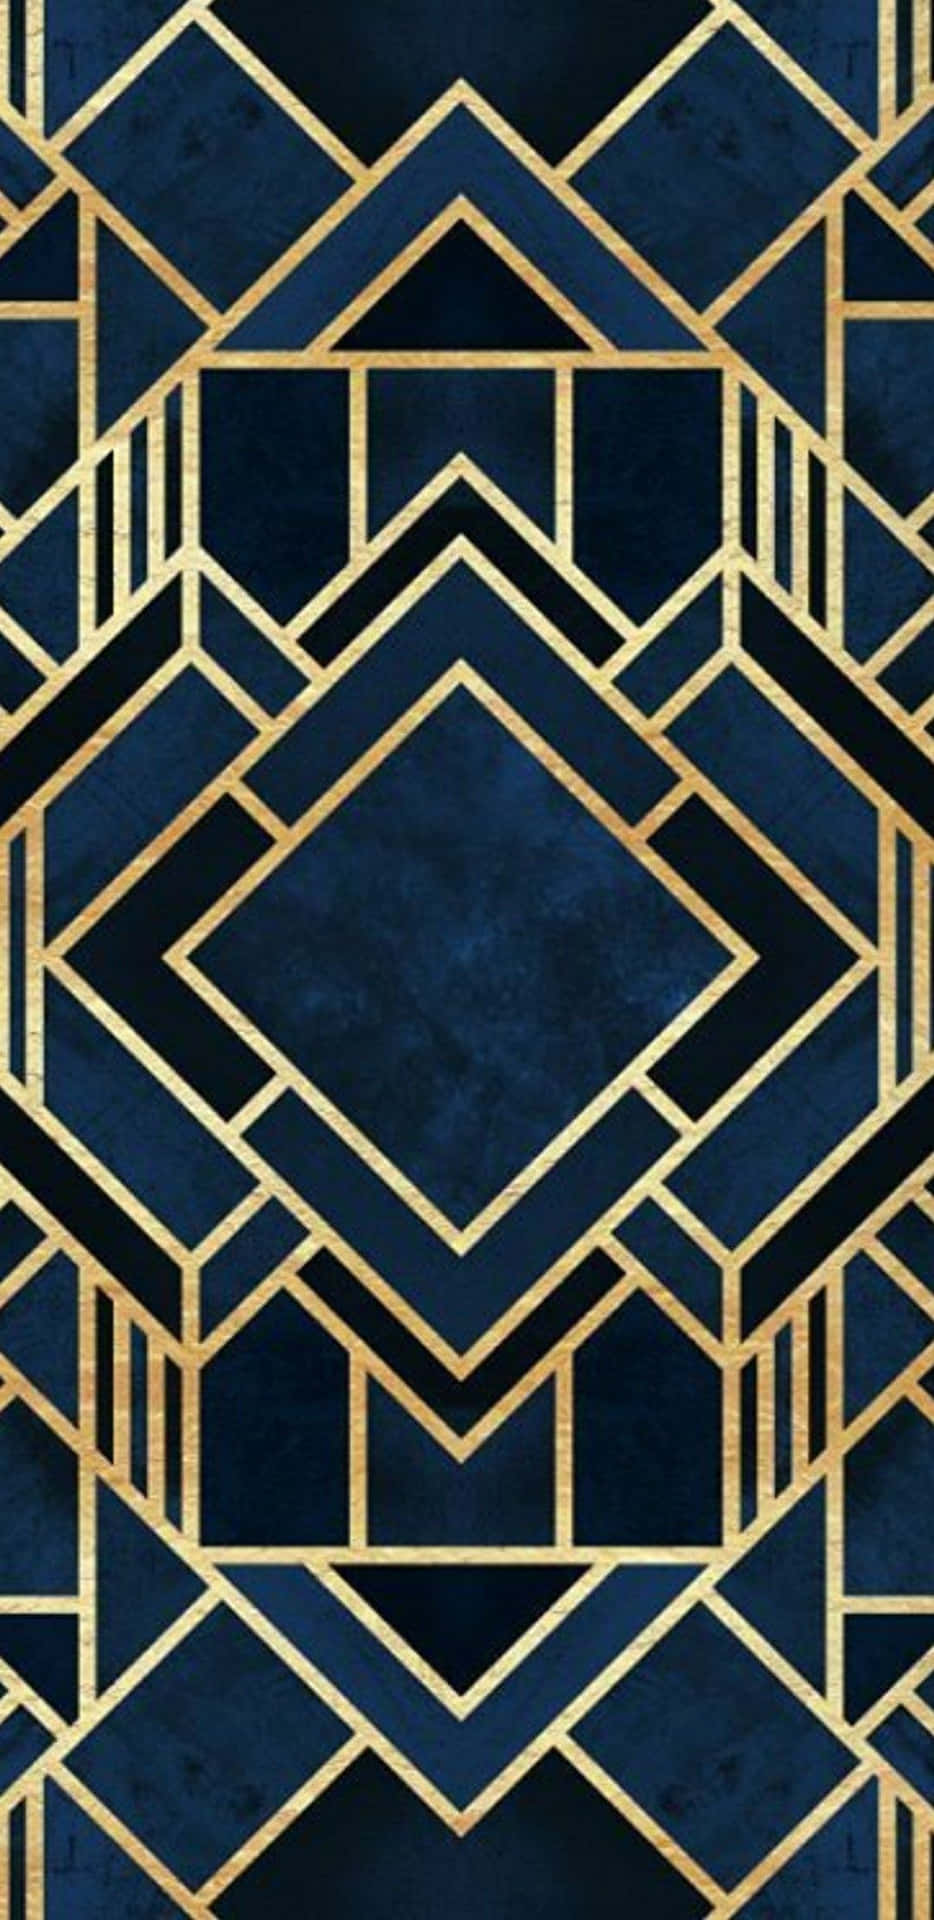 Blue And Gold Art Deco Iphone Wallpaper